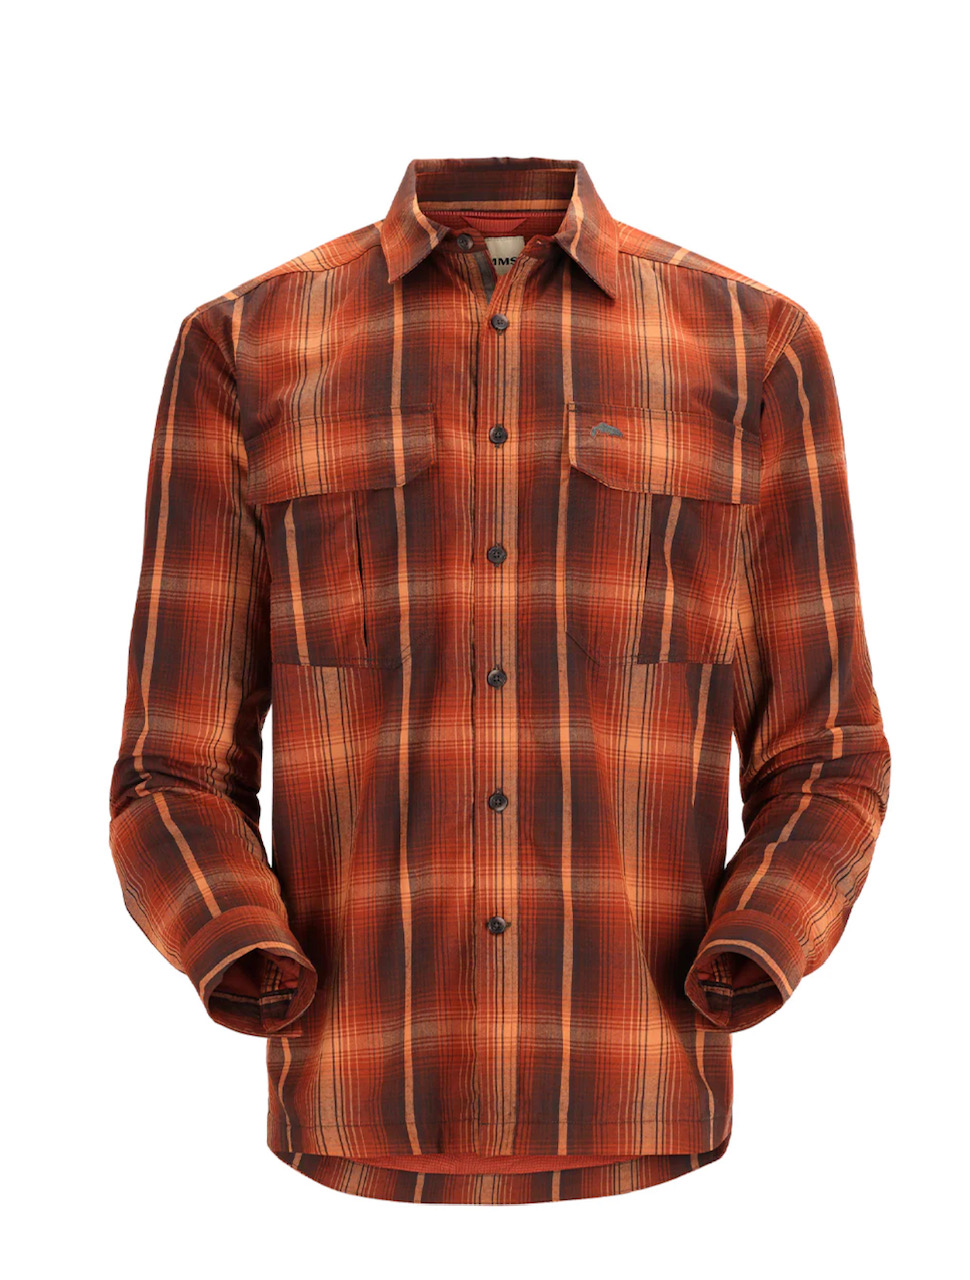 Simms M's Coldweather L/S Shirt - Hickory Clay - XL